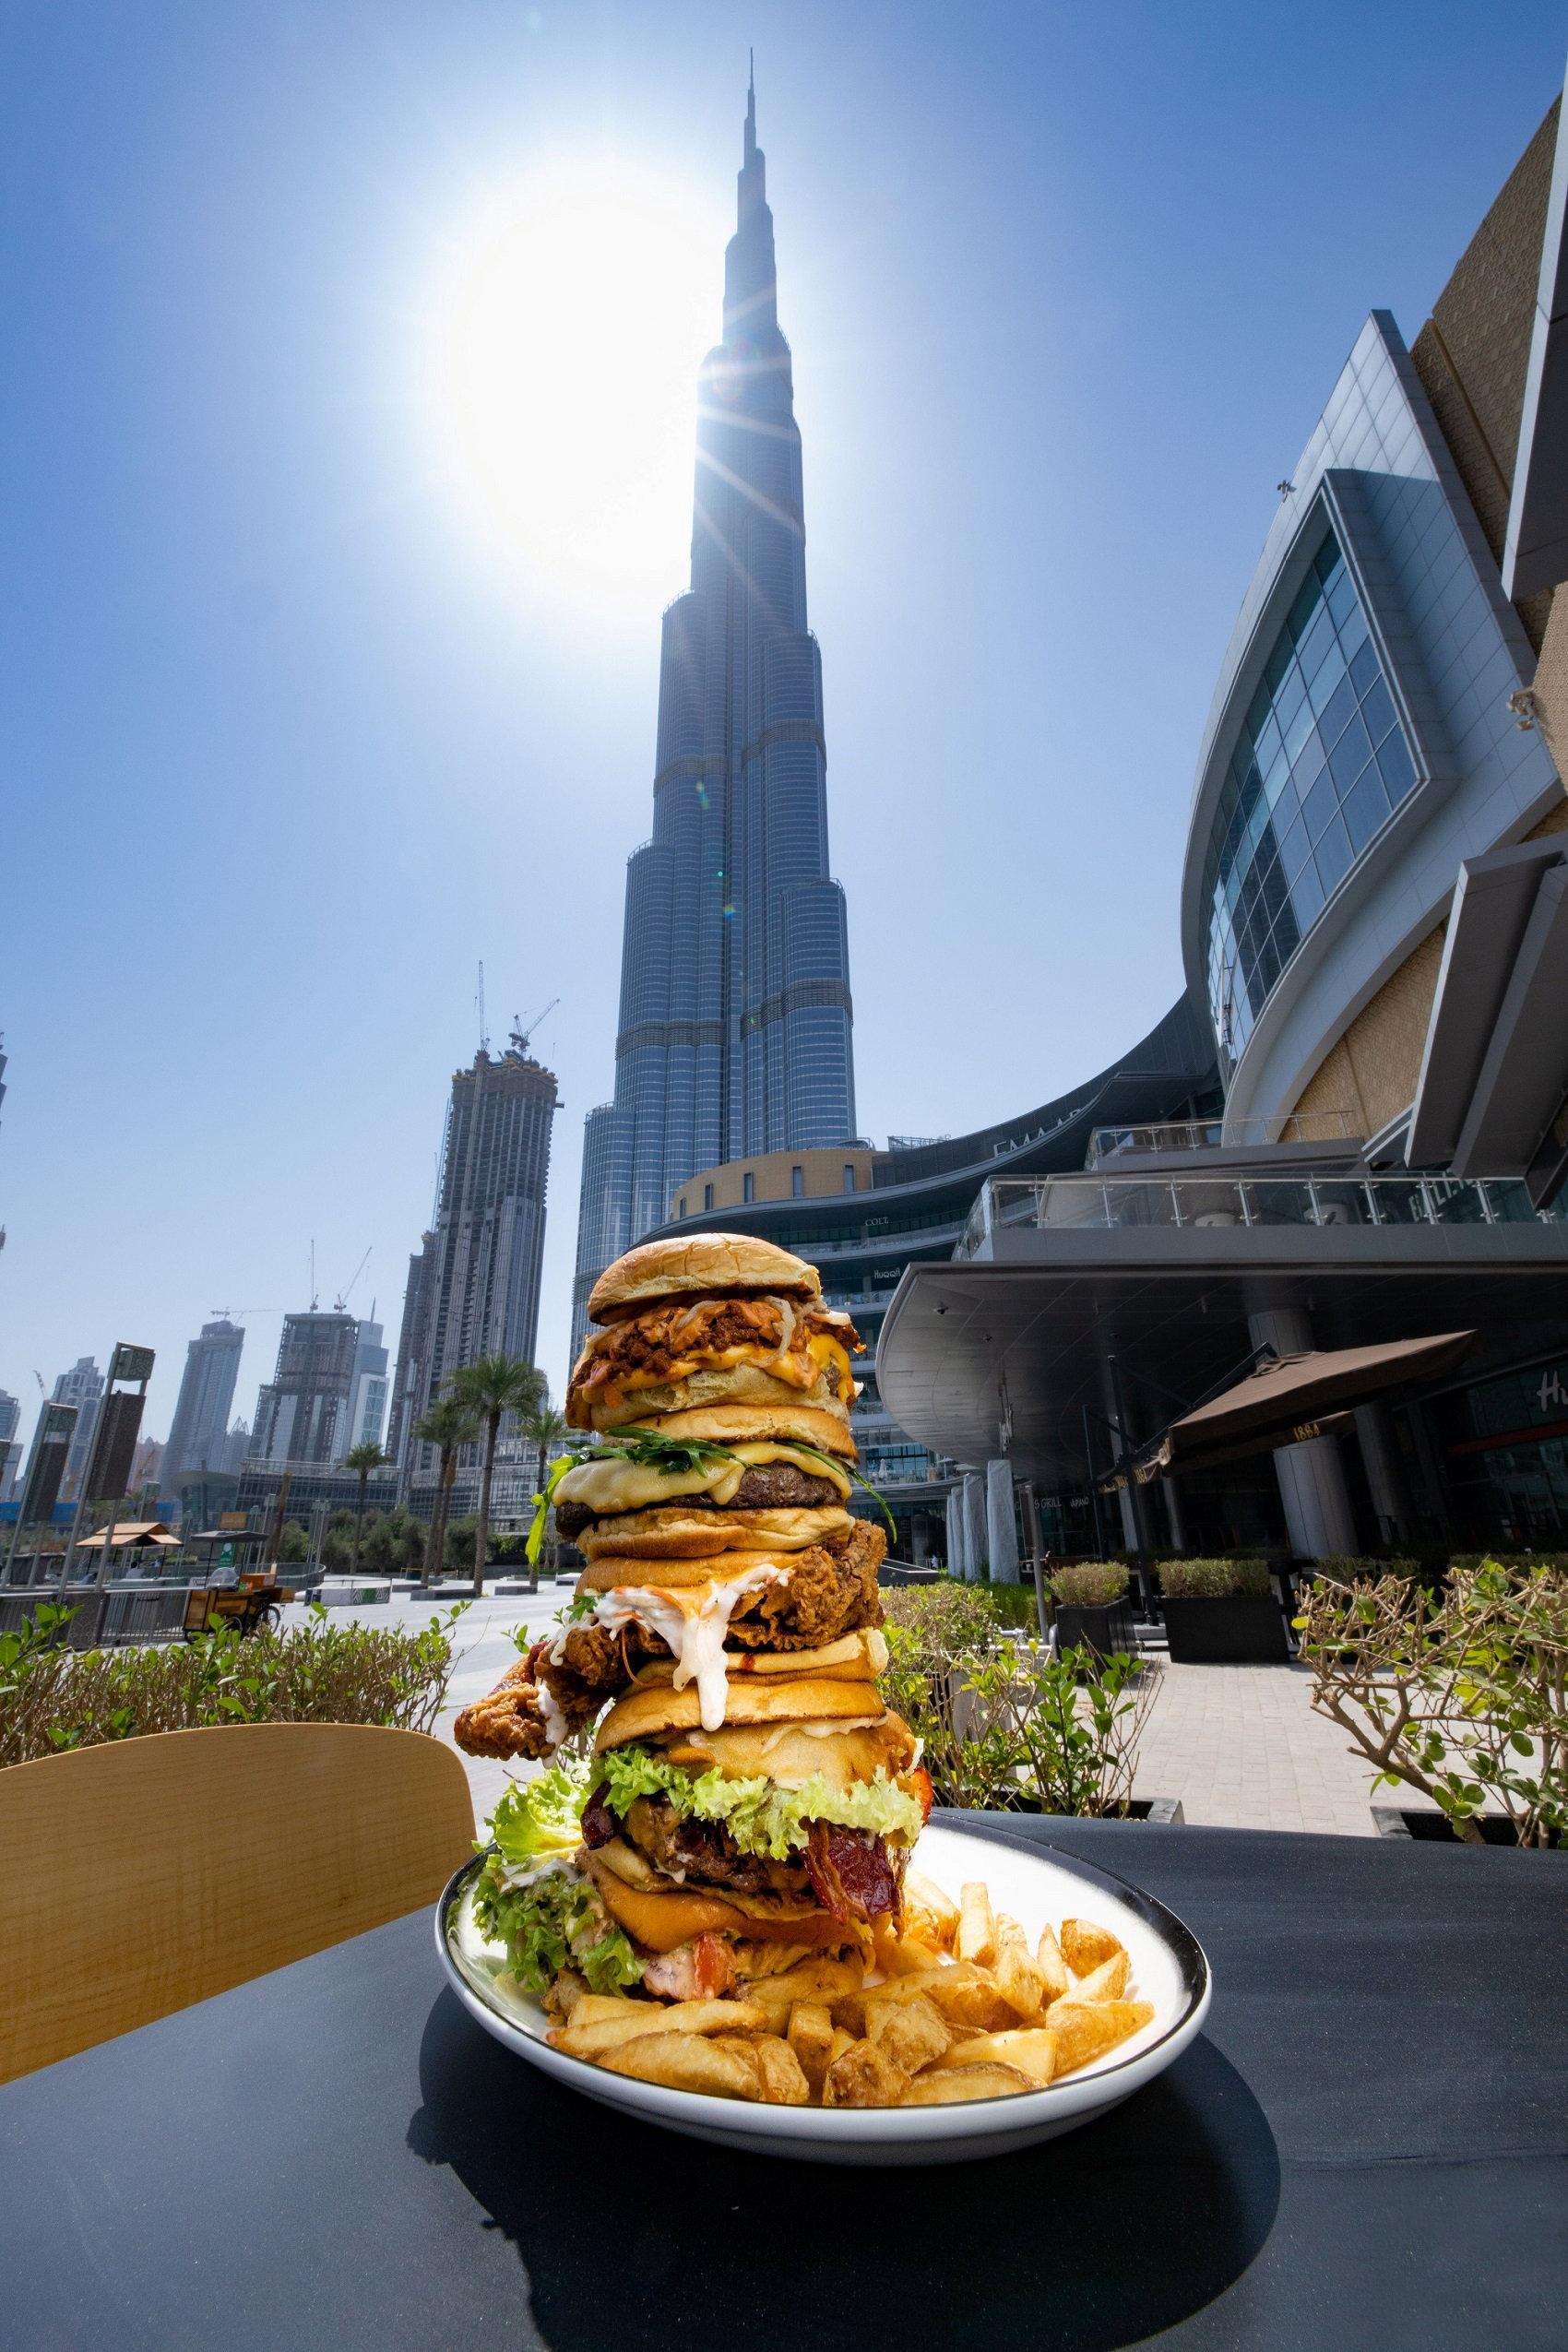 New Year's Eve 2020: The Dubai restaurants with views of the Burj Khalifa fireworks - their prices